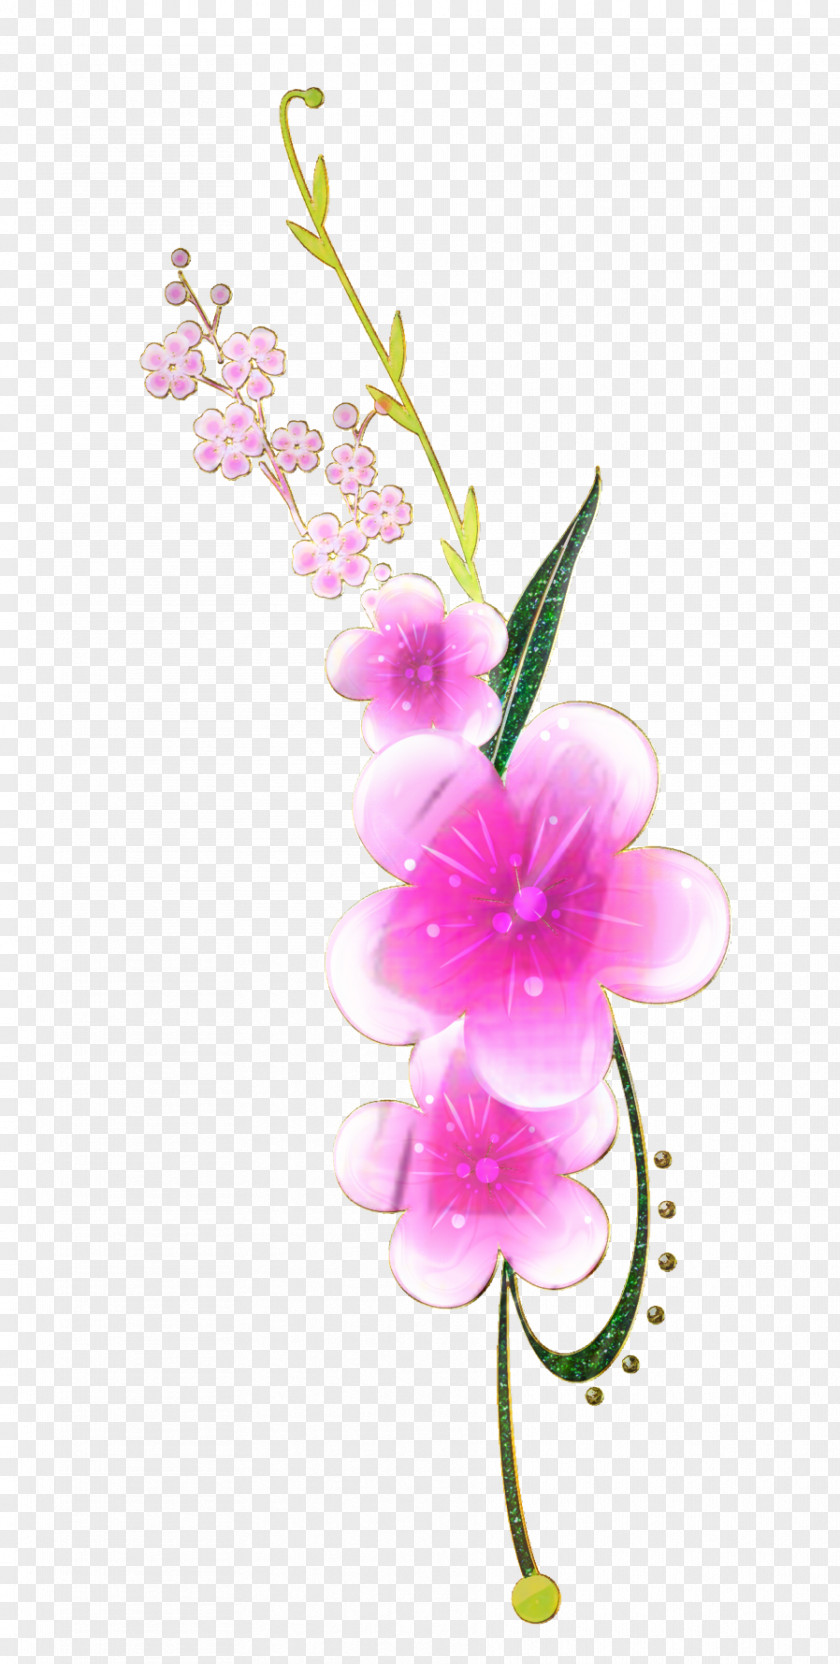 Cattleya Plant Stem Bouquet Of Flowers Drawing PNG